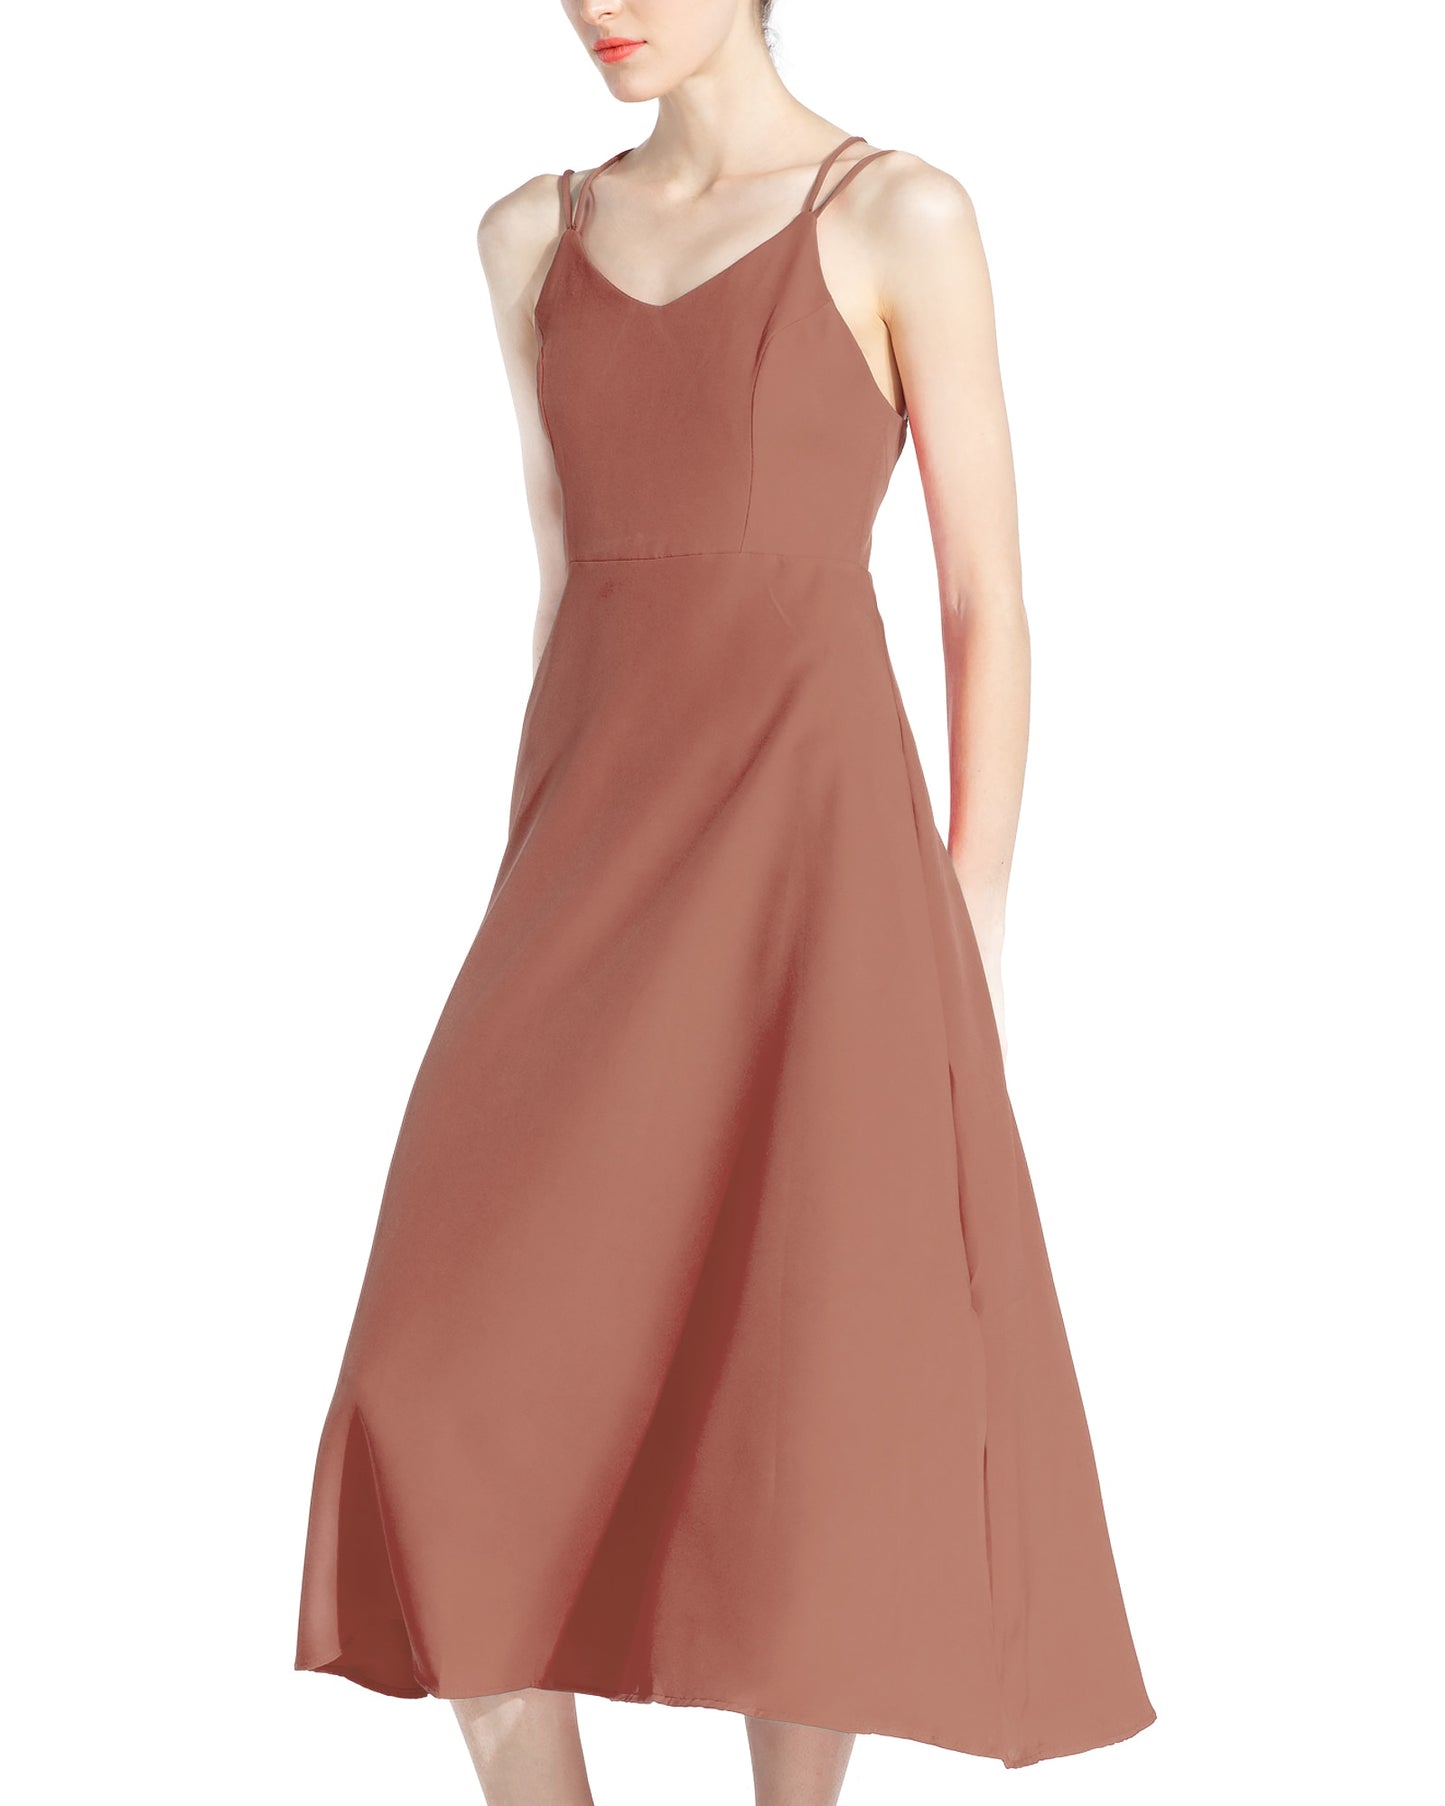 New-Coming Spring Summer Holiday Long Ankle-Length Women Dresses - WD8191